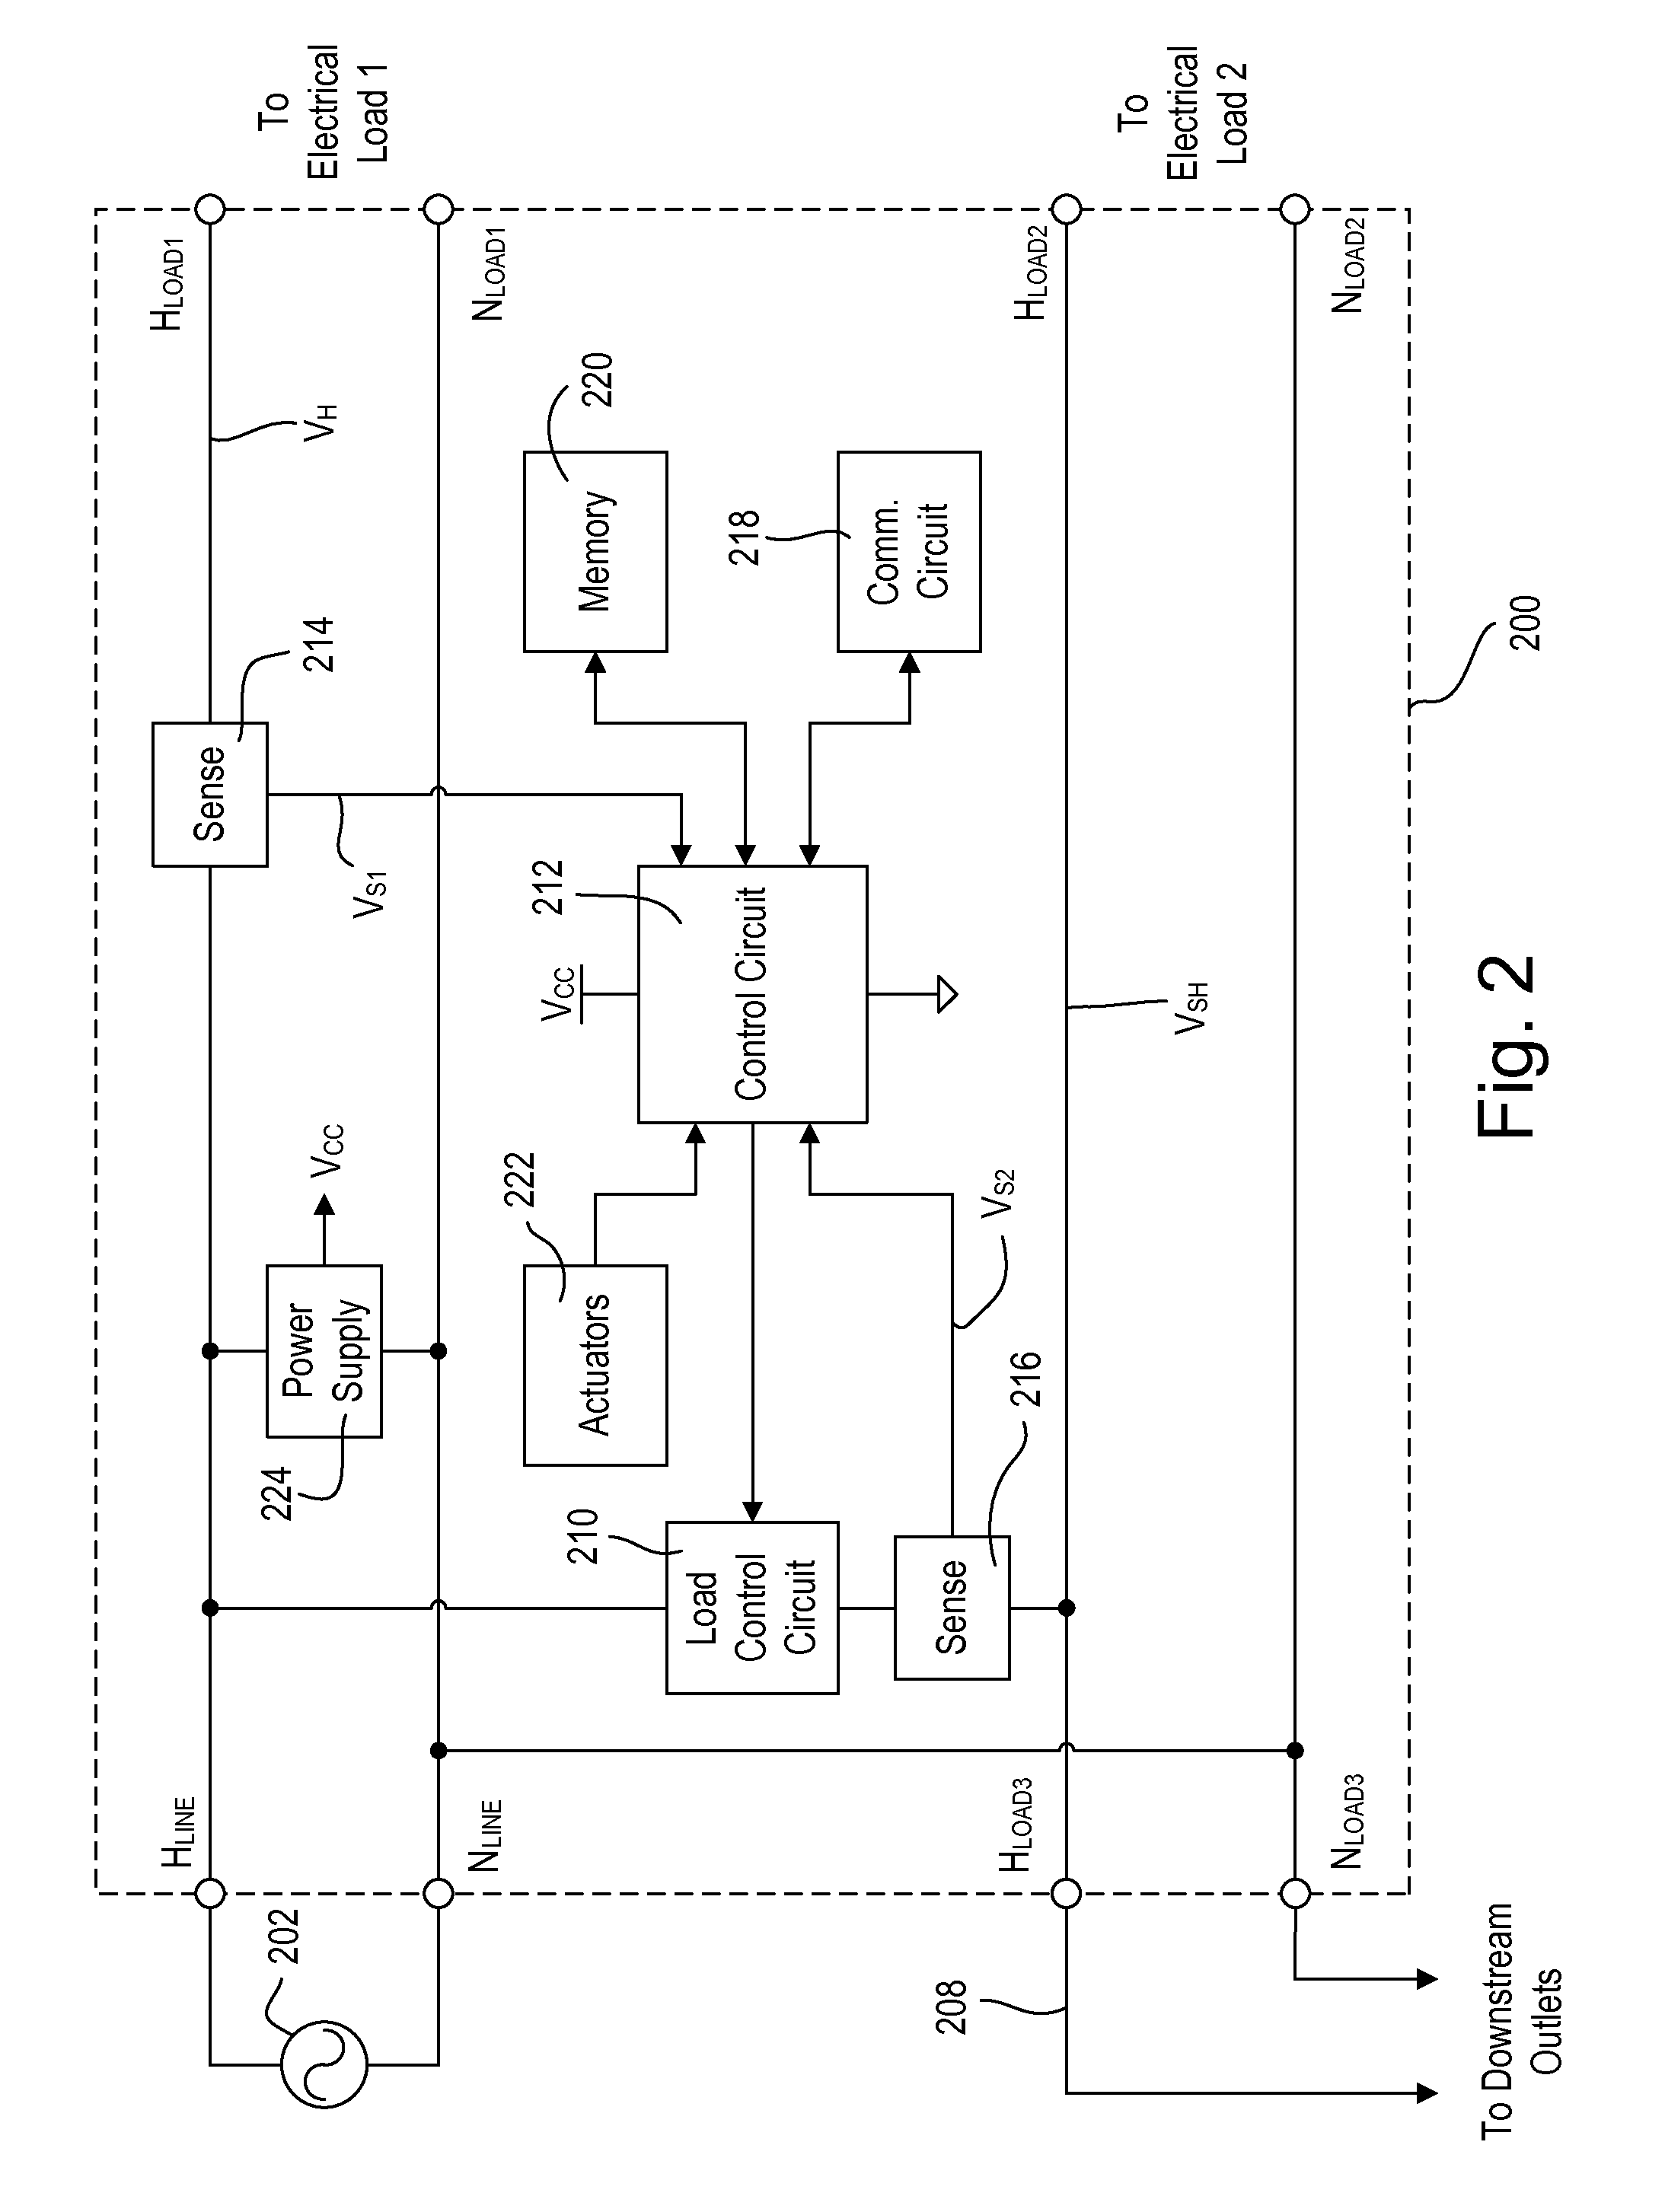 Controllable electrical outlet with a controlled wired output